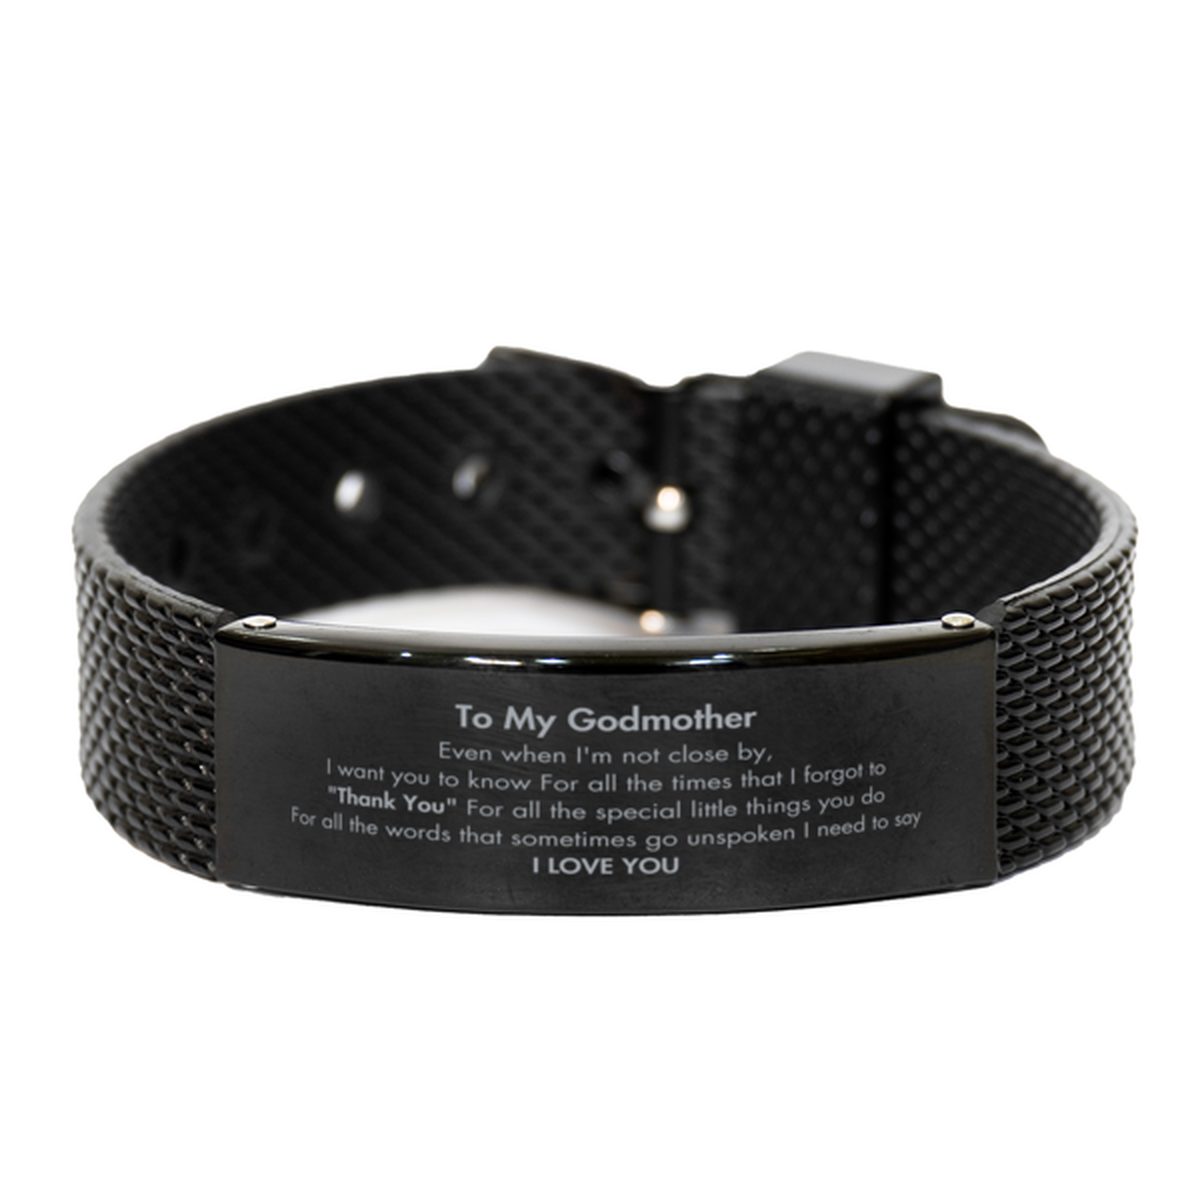 Thank You Gifts for Godmother, Keepsake Black Shark Mesh Bracelet Gifts for Godmother Birthday Mother's day Father's Day Godmother For all the words That sometimes go unspoken I need to say I LOVE YOU